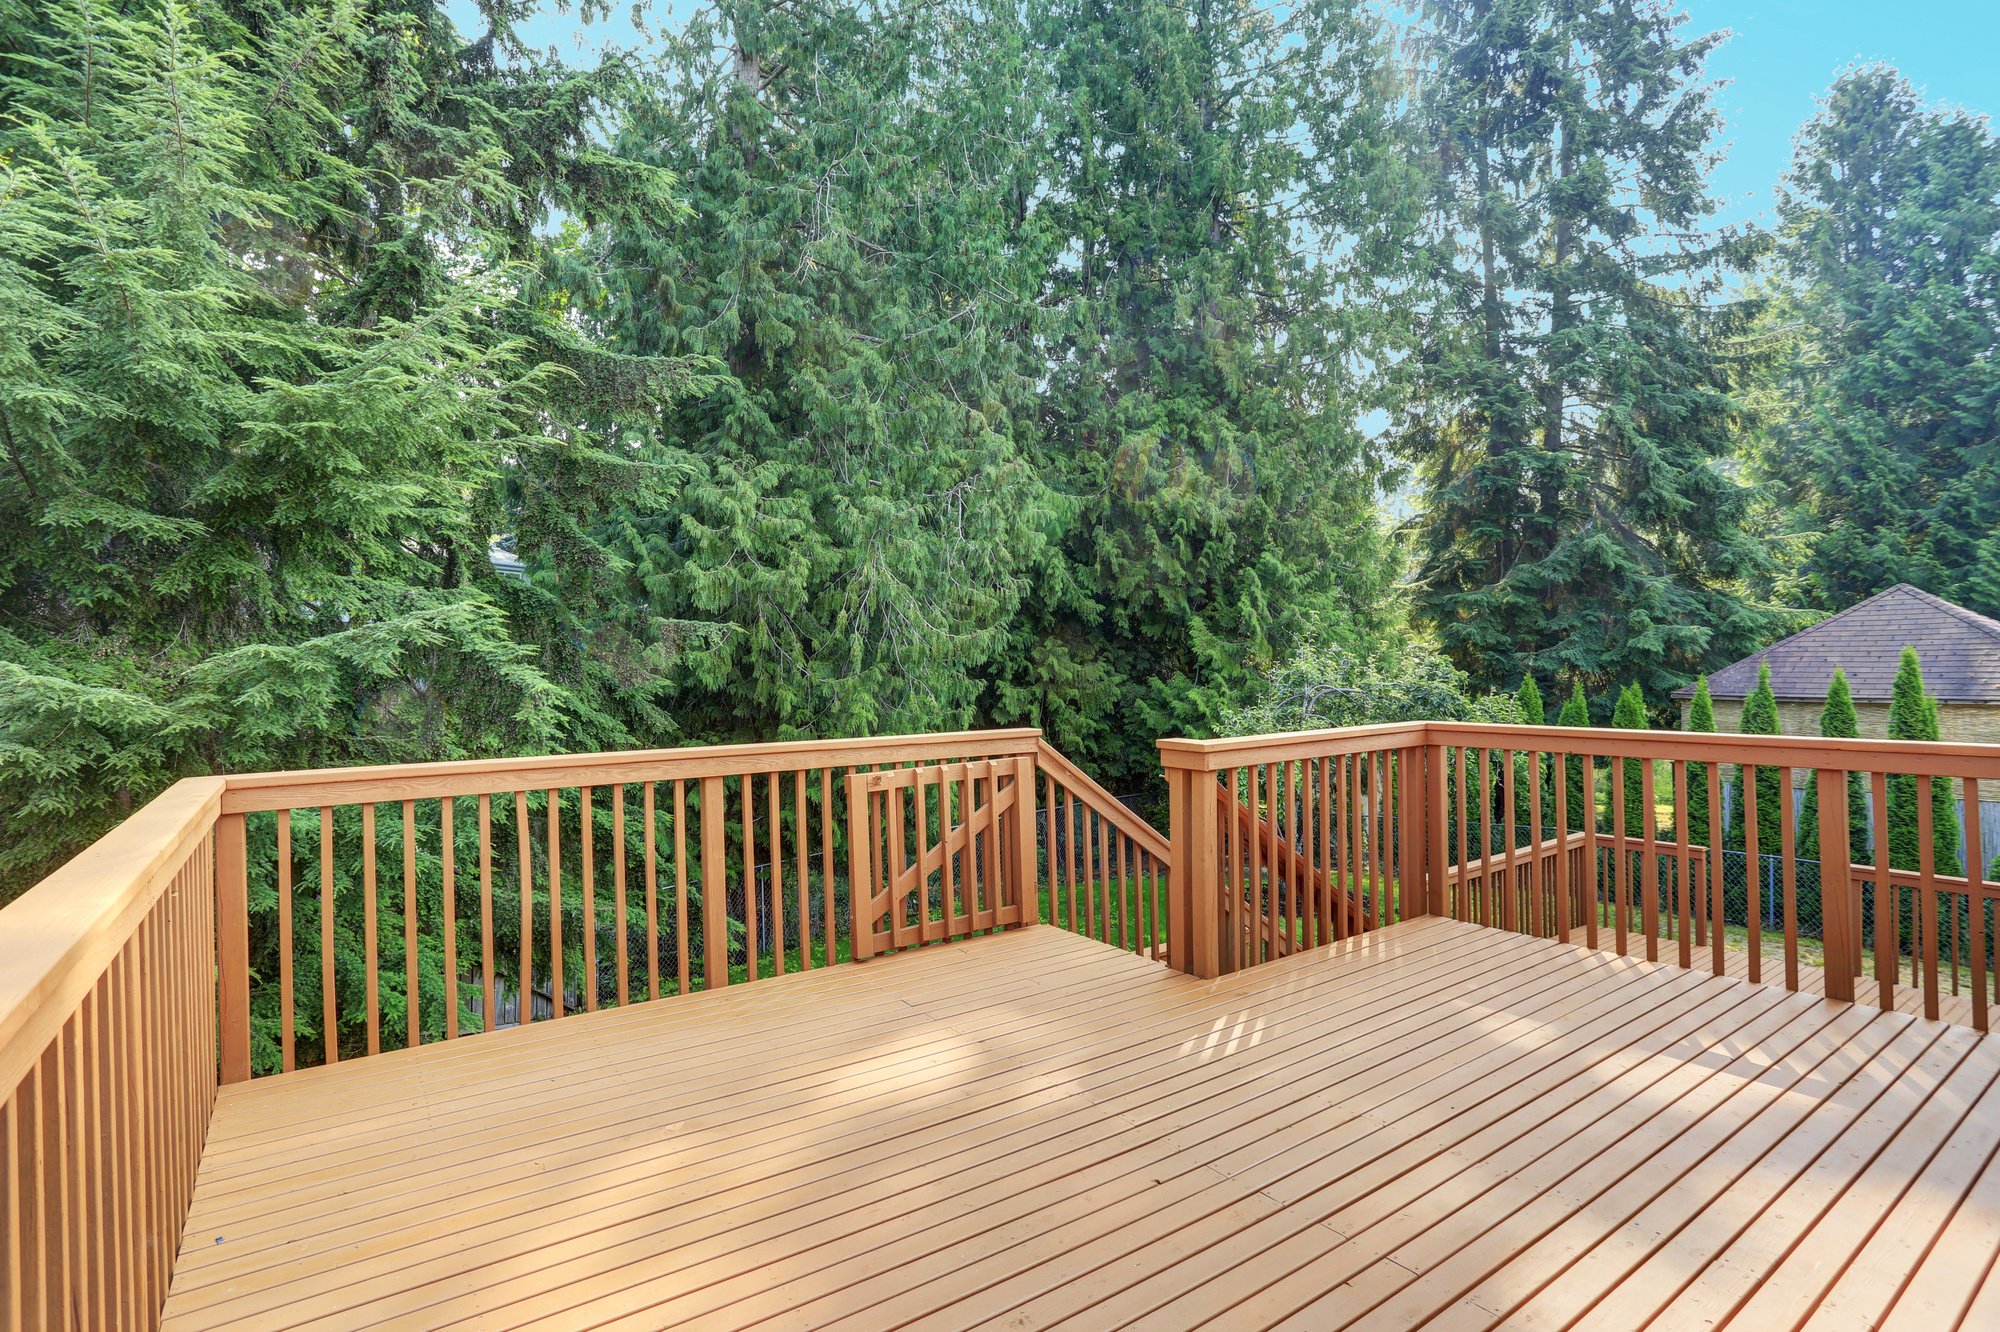 The benefits and drawbacks of wood versus composite decking